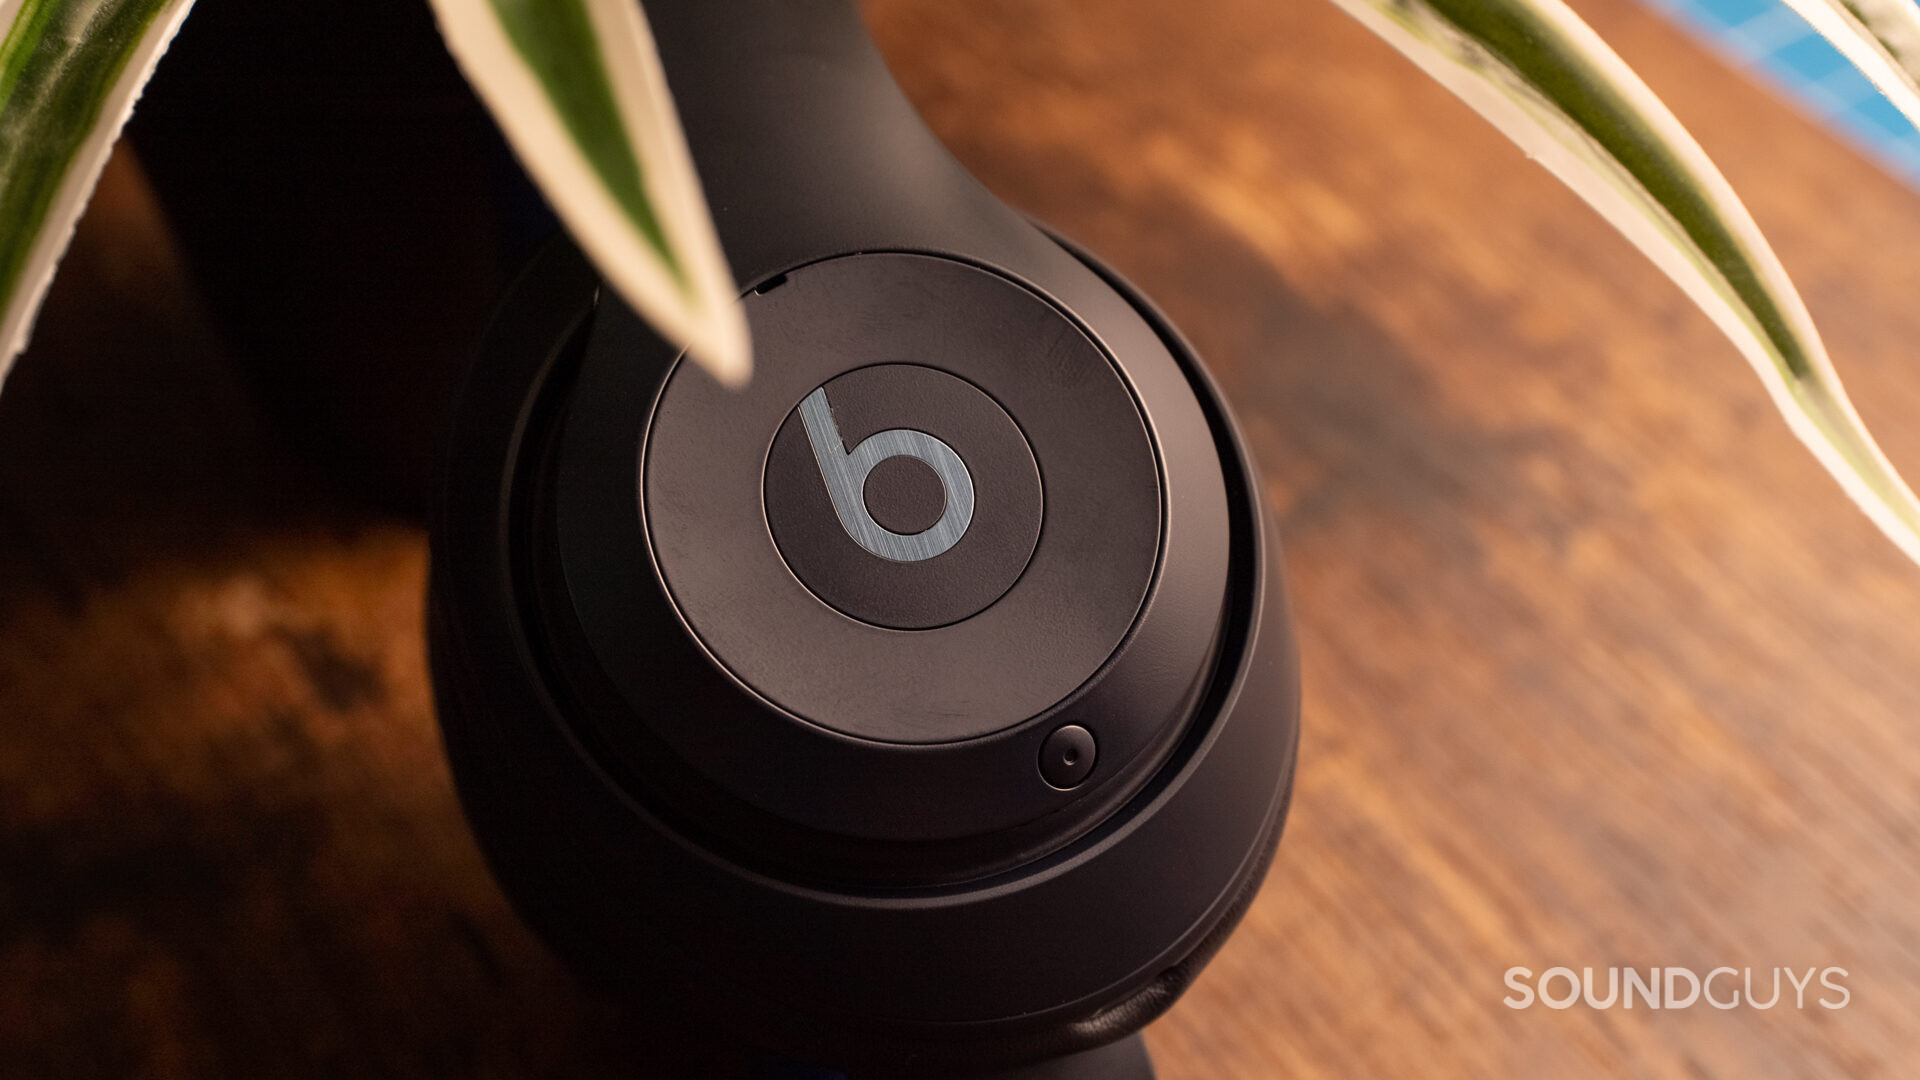 The new Beats Studio Pros are sweat proof, noise canceling, and never